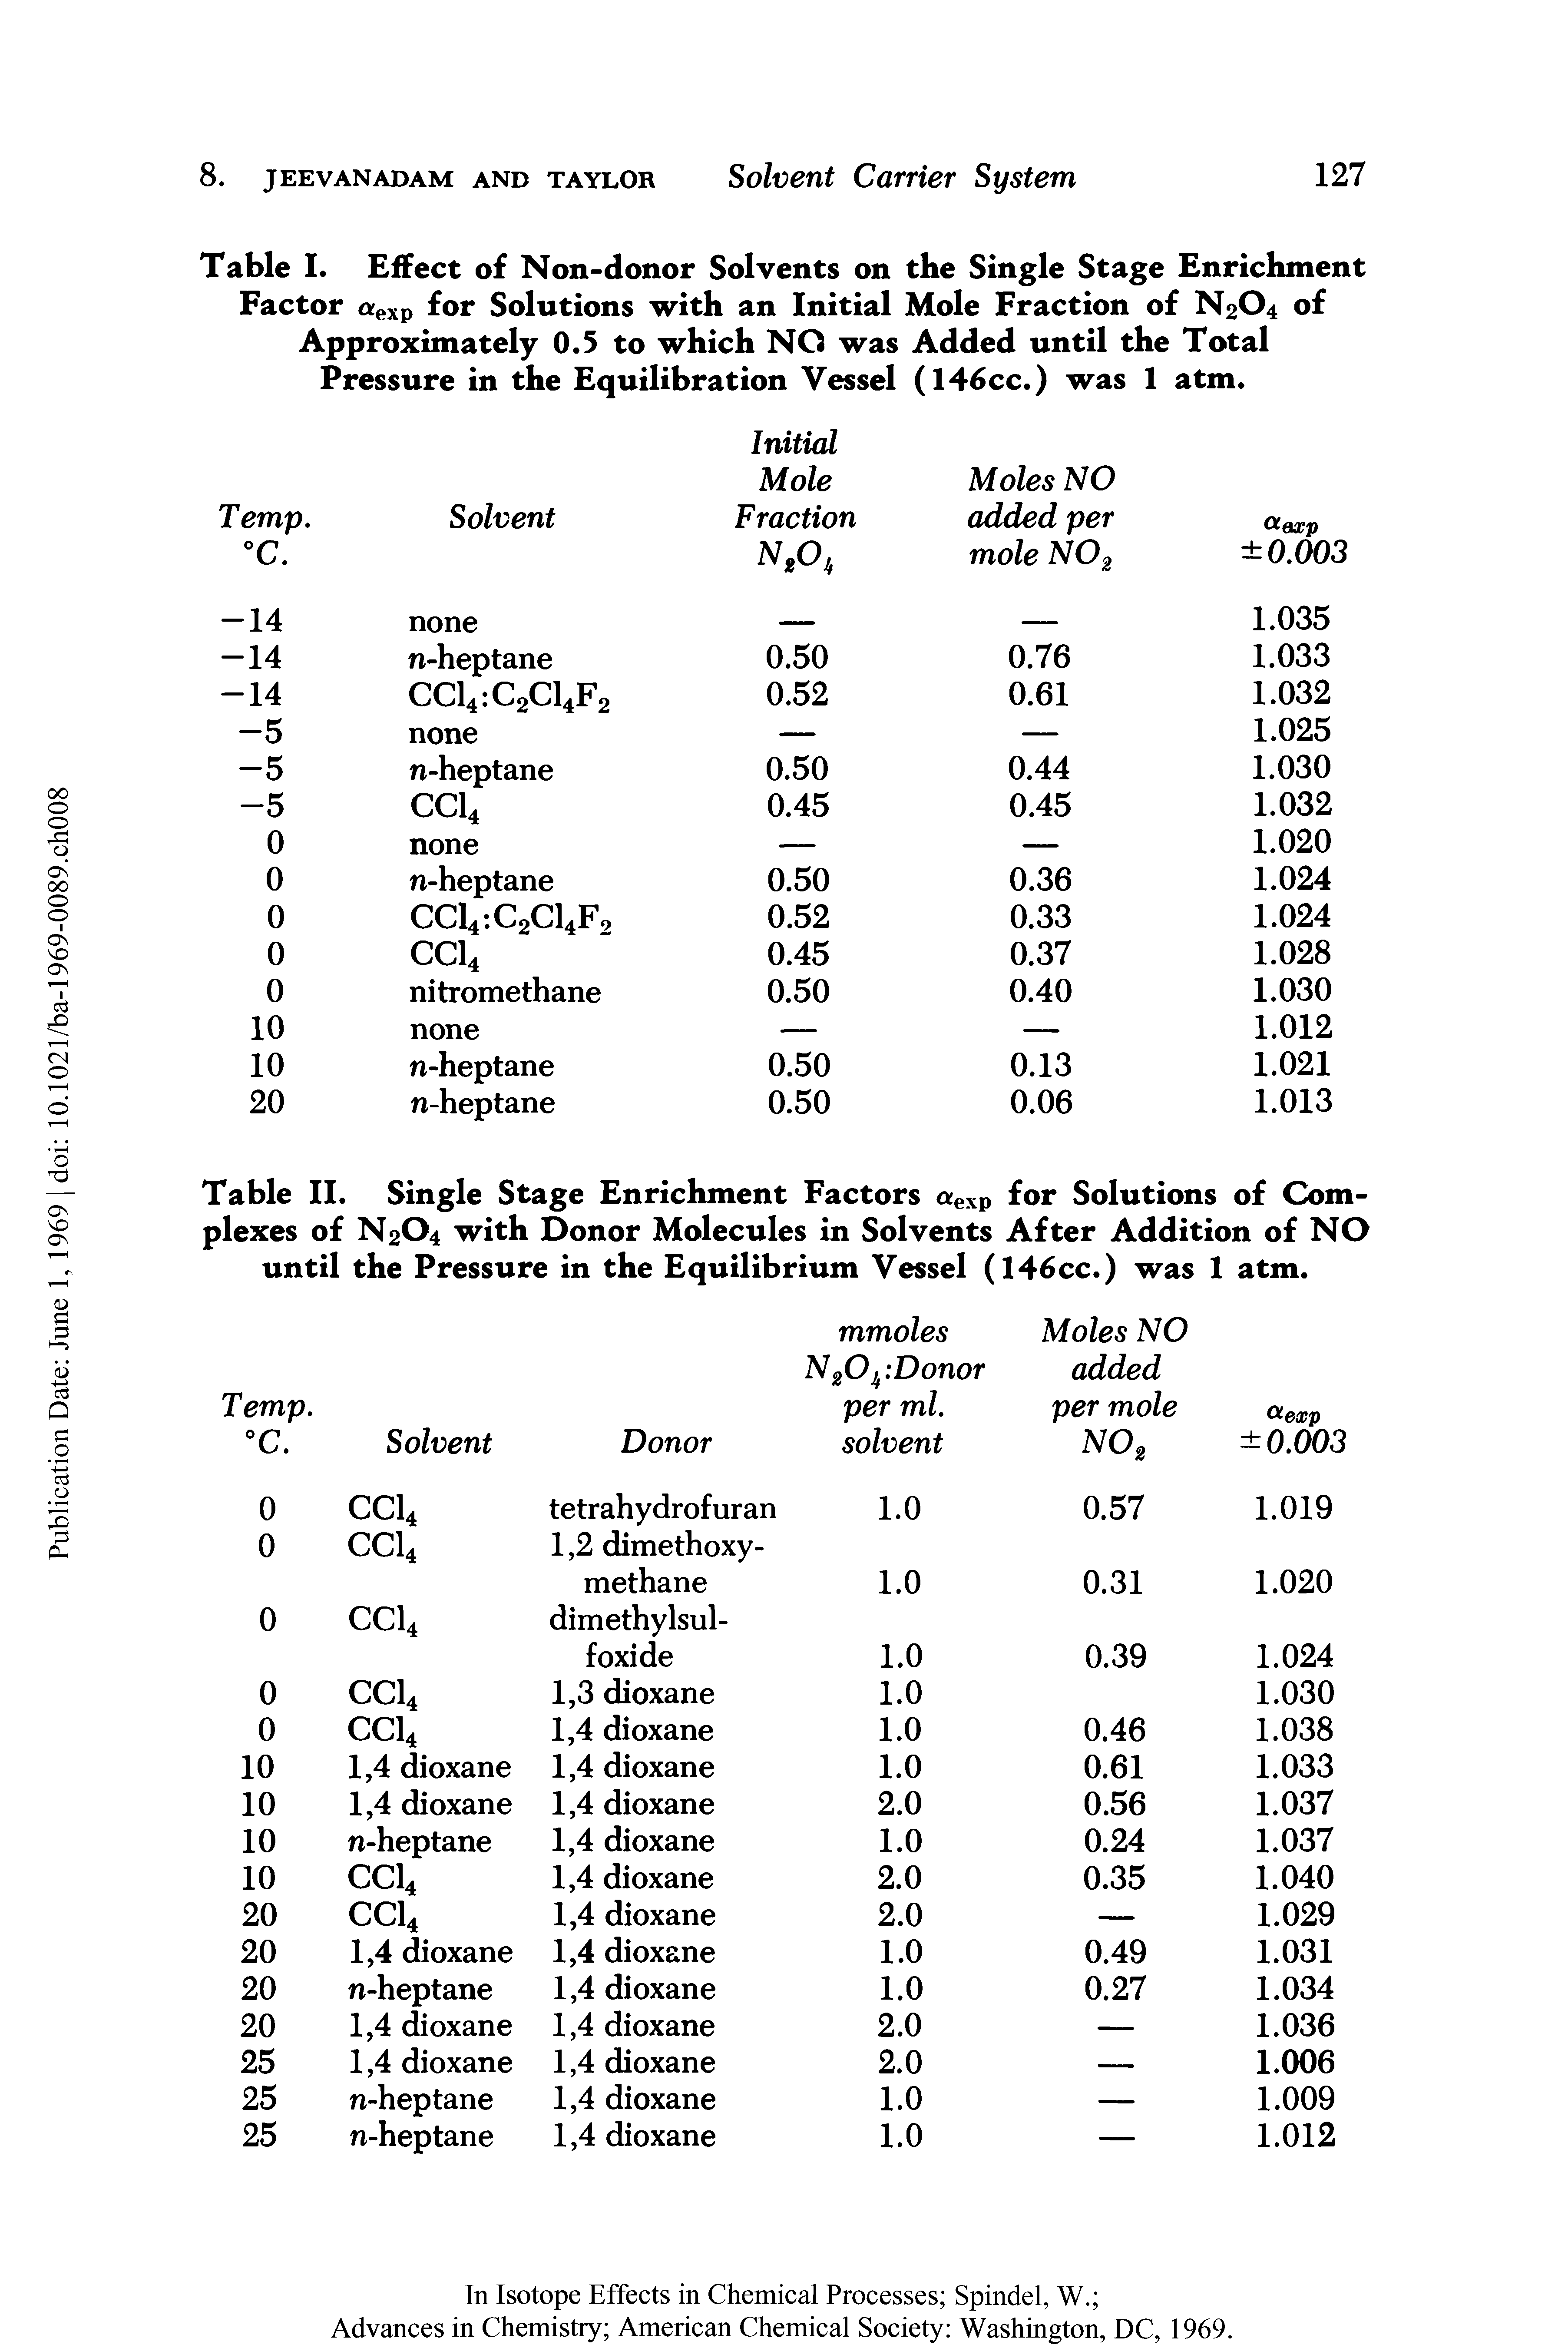 Table I. Effect of Non-donor Solvents on the Single Stage Enrichment Factor exp for Solutions with an Initial Mole Fraction of N2O4 of Approximately 0.5 to which NO was Added until the Total Pressure in the Equilibration Vessel (146cc.) was 1 atm.